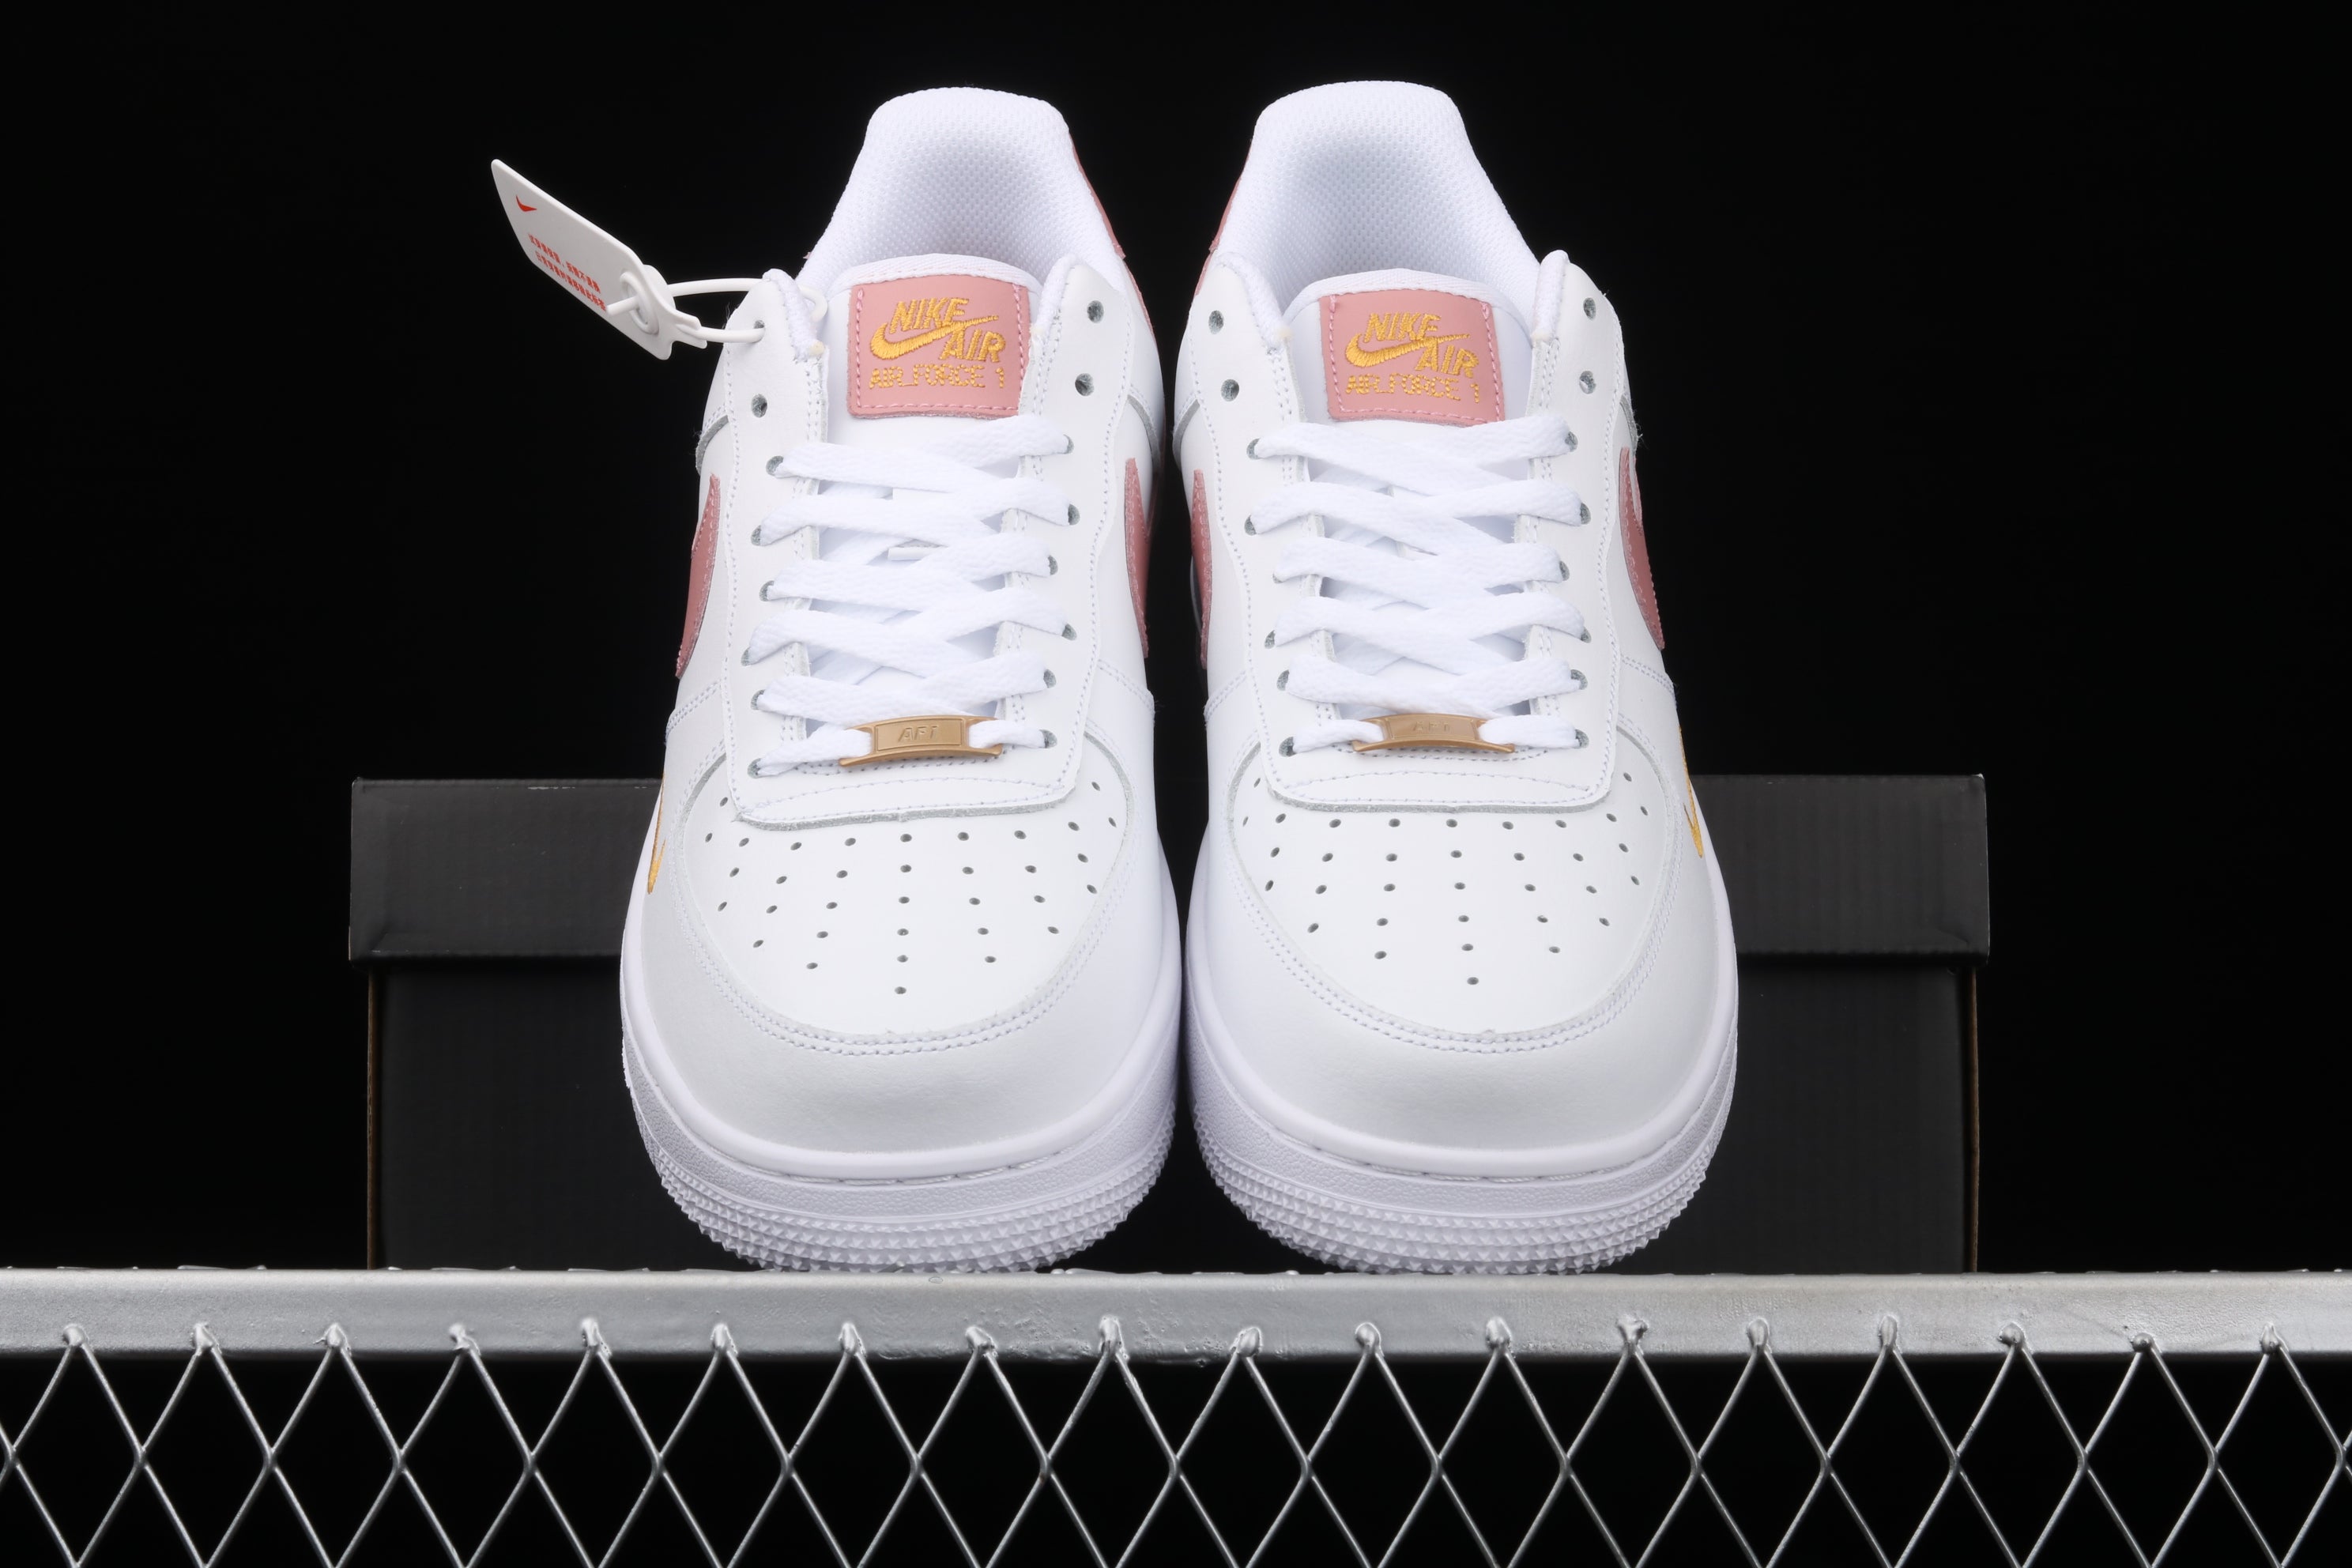 NikeWMNS Air Force 1 AF1 - Rust Pink